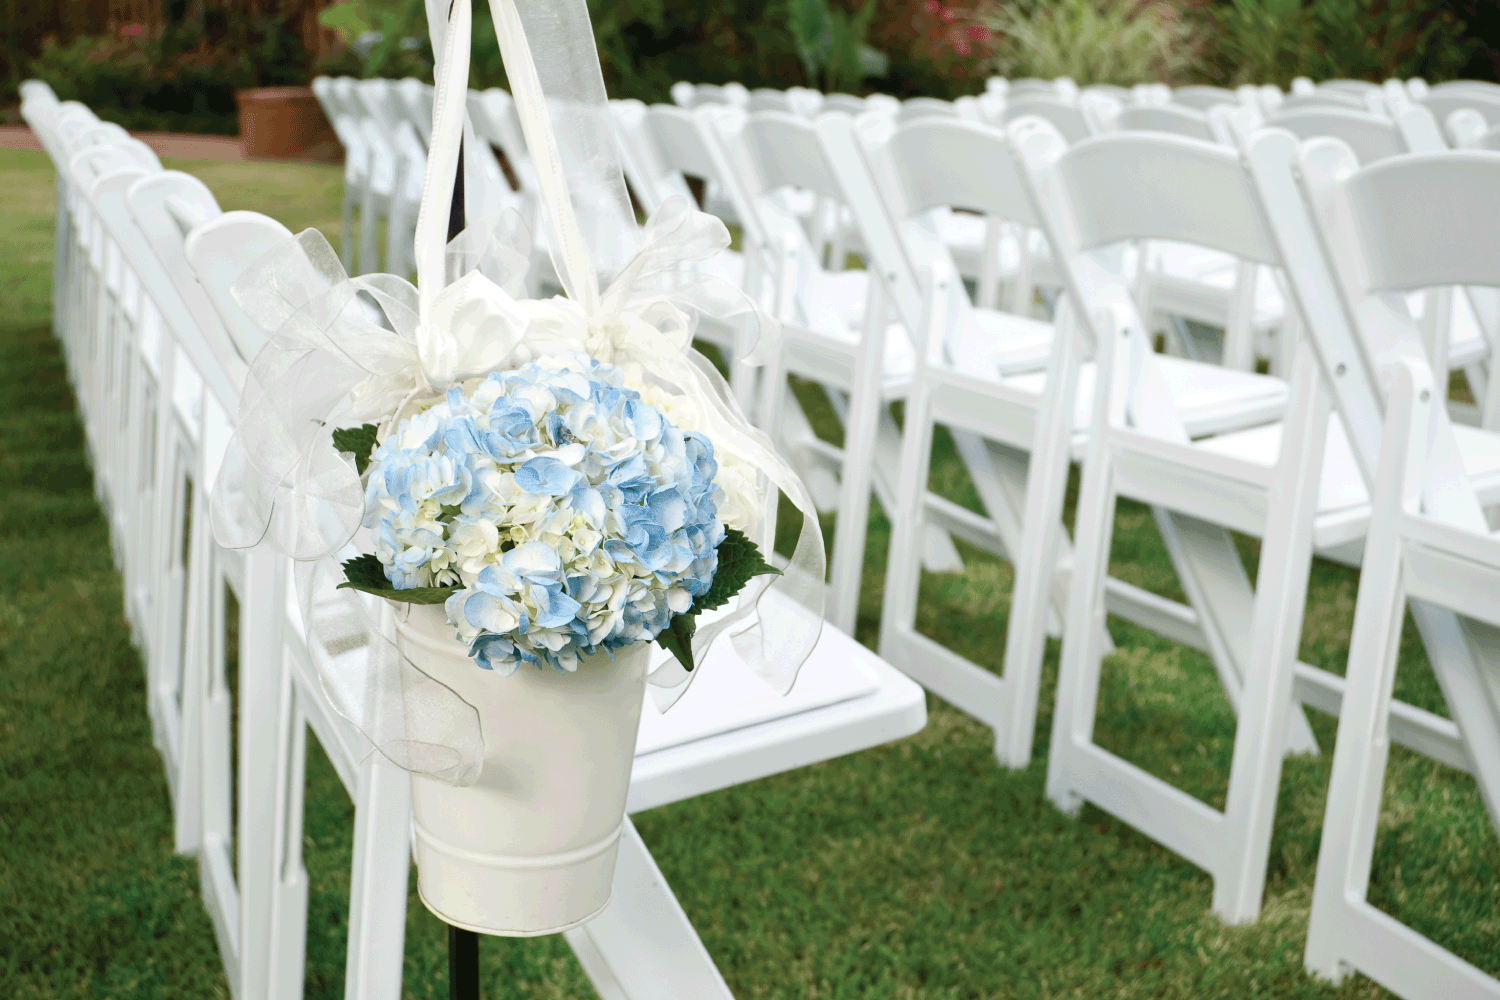 rows of white folding chairs and flower hung on the wedding aisle